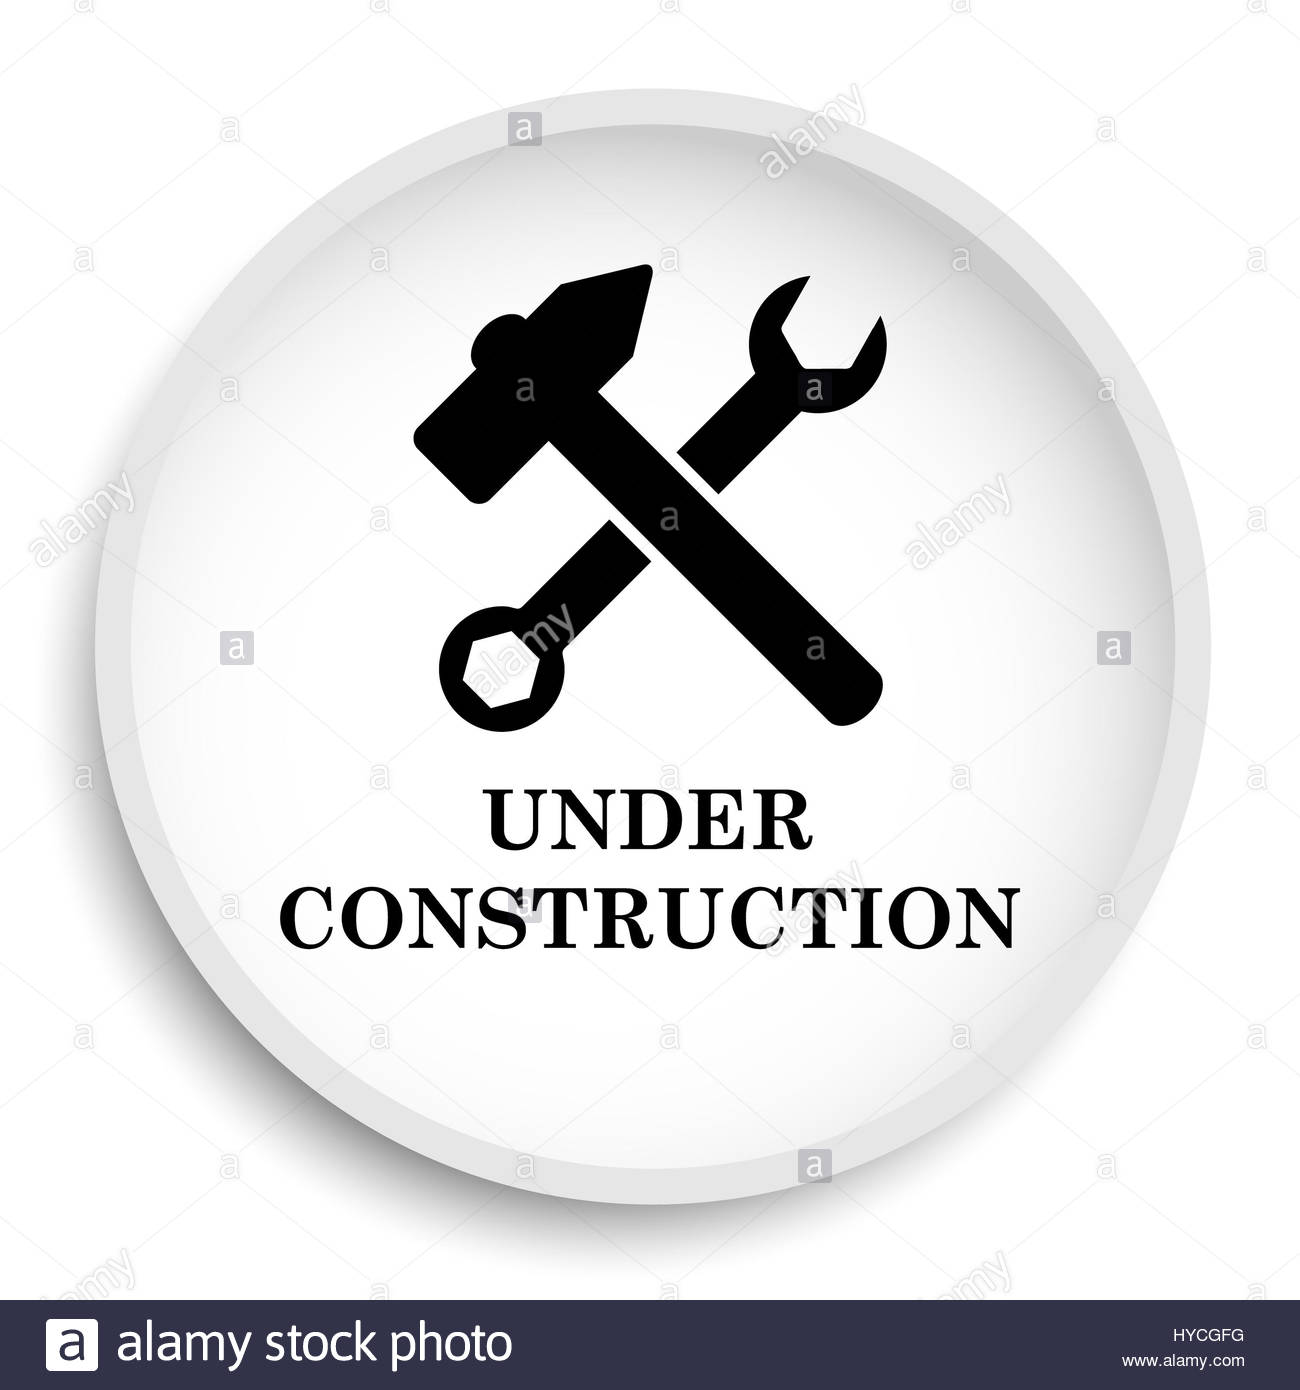 Hammer, settings, sign, under construction icon | Icon search engine